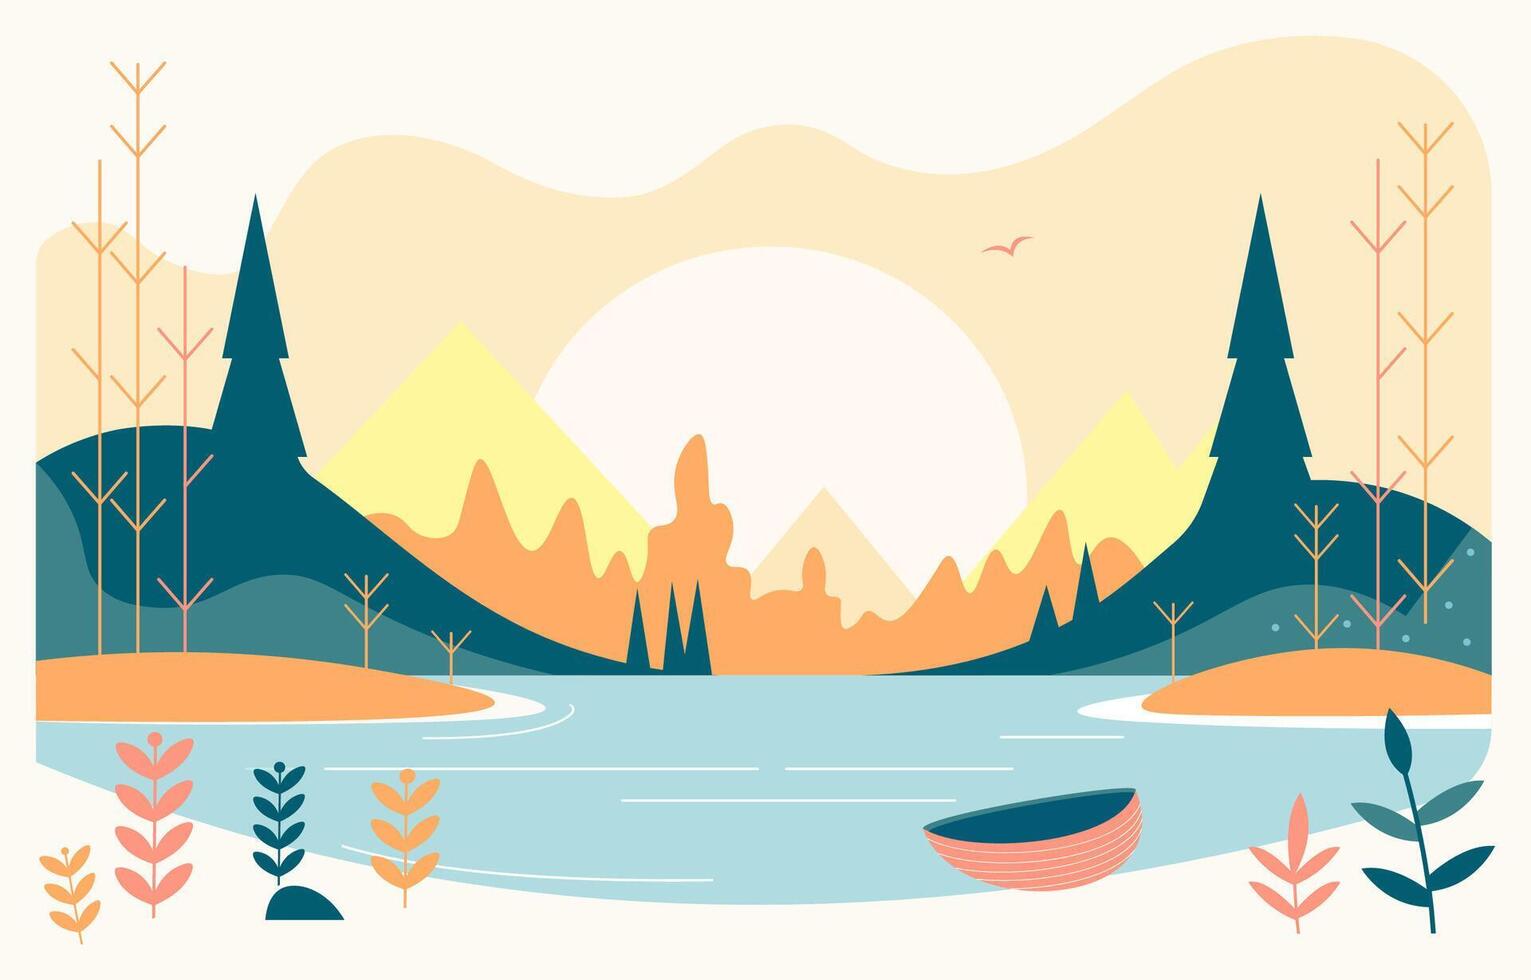 Flat Design Illustration of Lake River with Mountain and Pine Trees in Summer vector